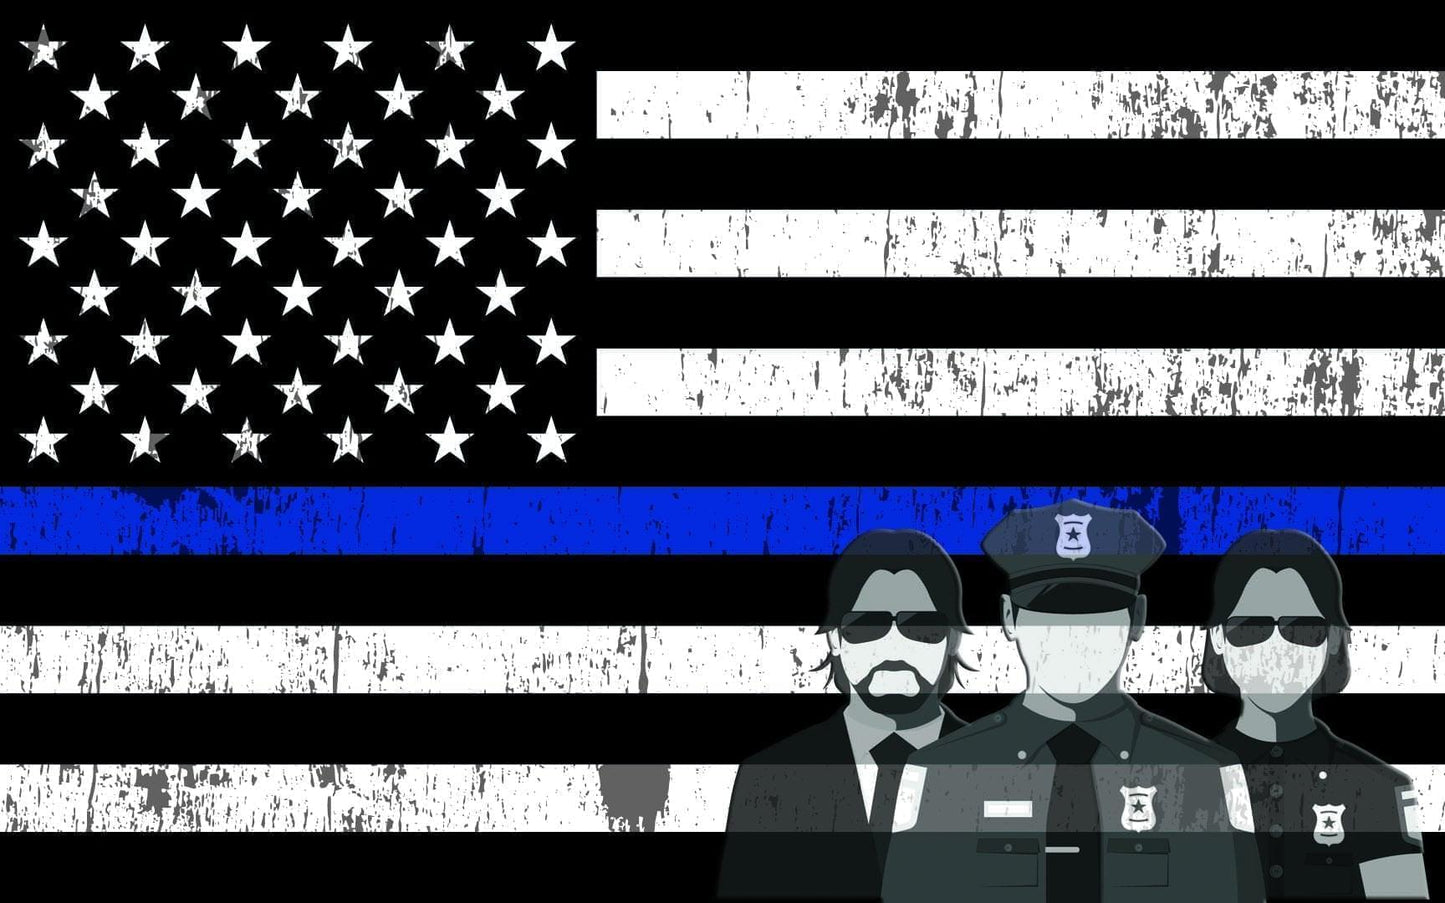 American Flag Thin Blue Line Subdued Decal